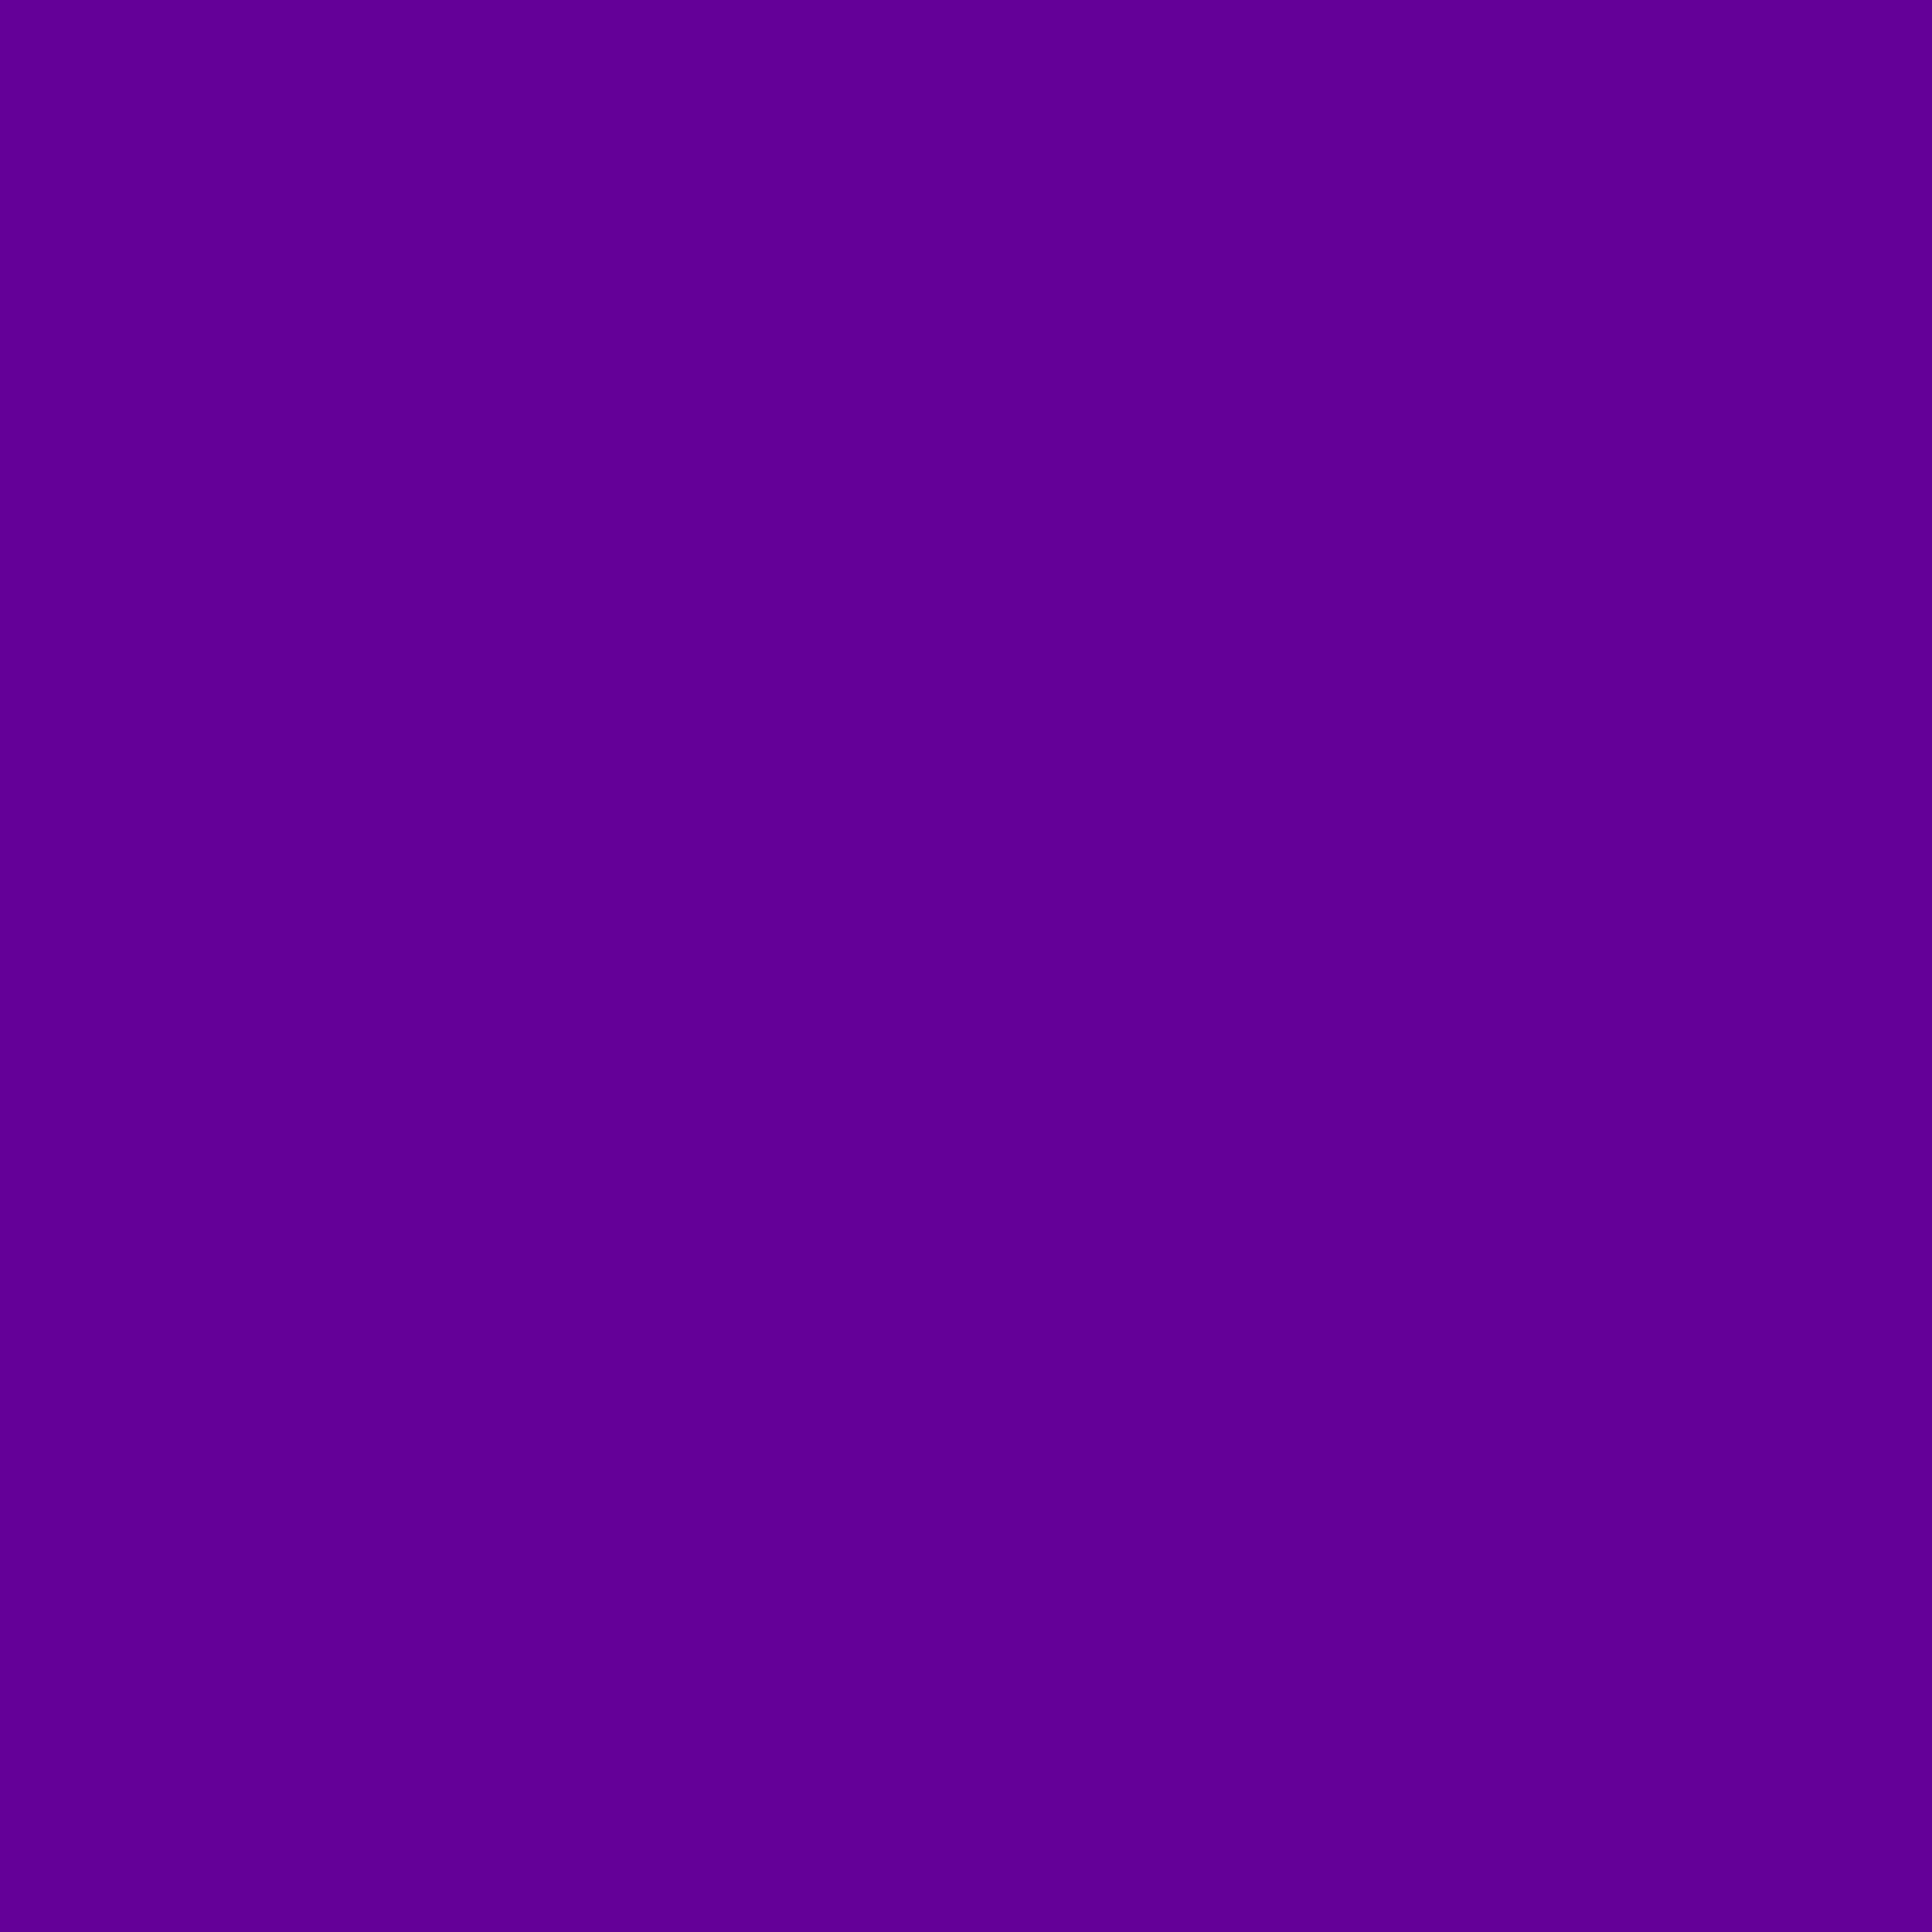 File:Solid purple.svg - Wikimedia Commons